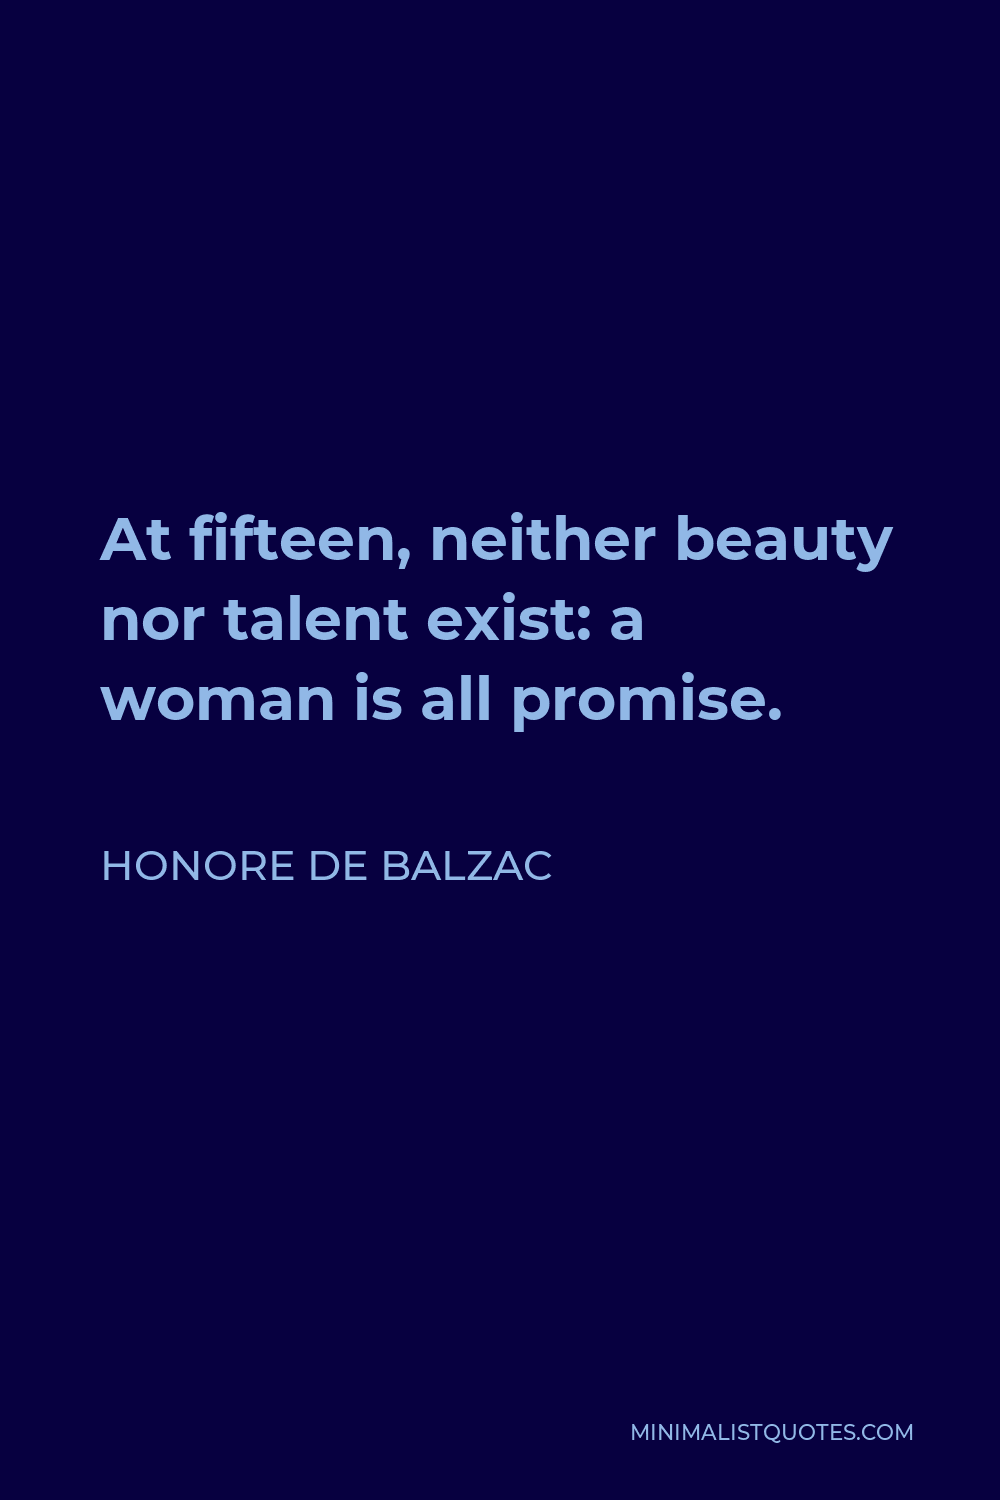 Honore de Balzac Quote - At fifteen, neither beauty nor talent exist: a woman is all promise.